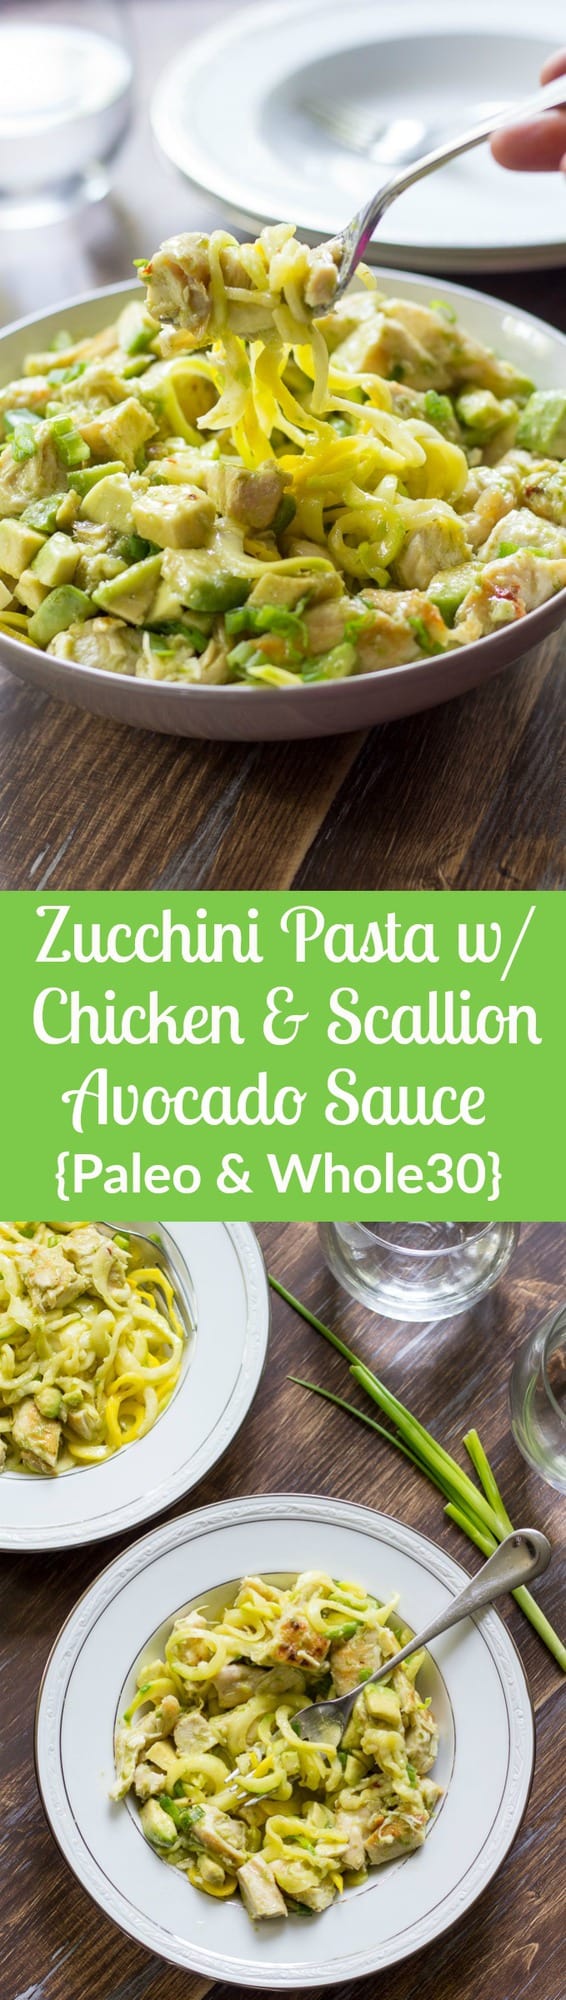 Zucchini Pasta with Chicken an easy scallion avocado sauce that's whipped up quickly in a blender. Great weeknight summer dinner and can be eaten warm or cold!